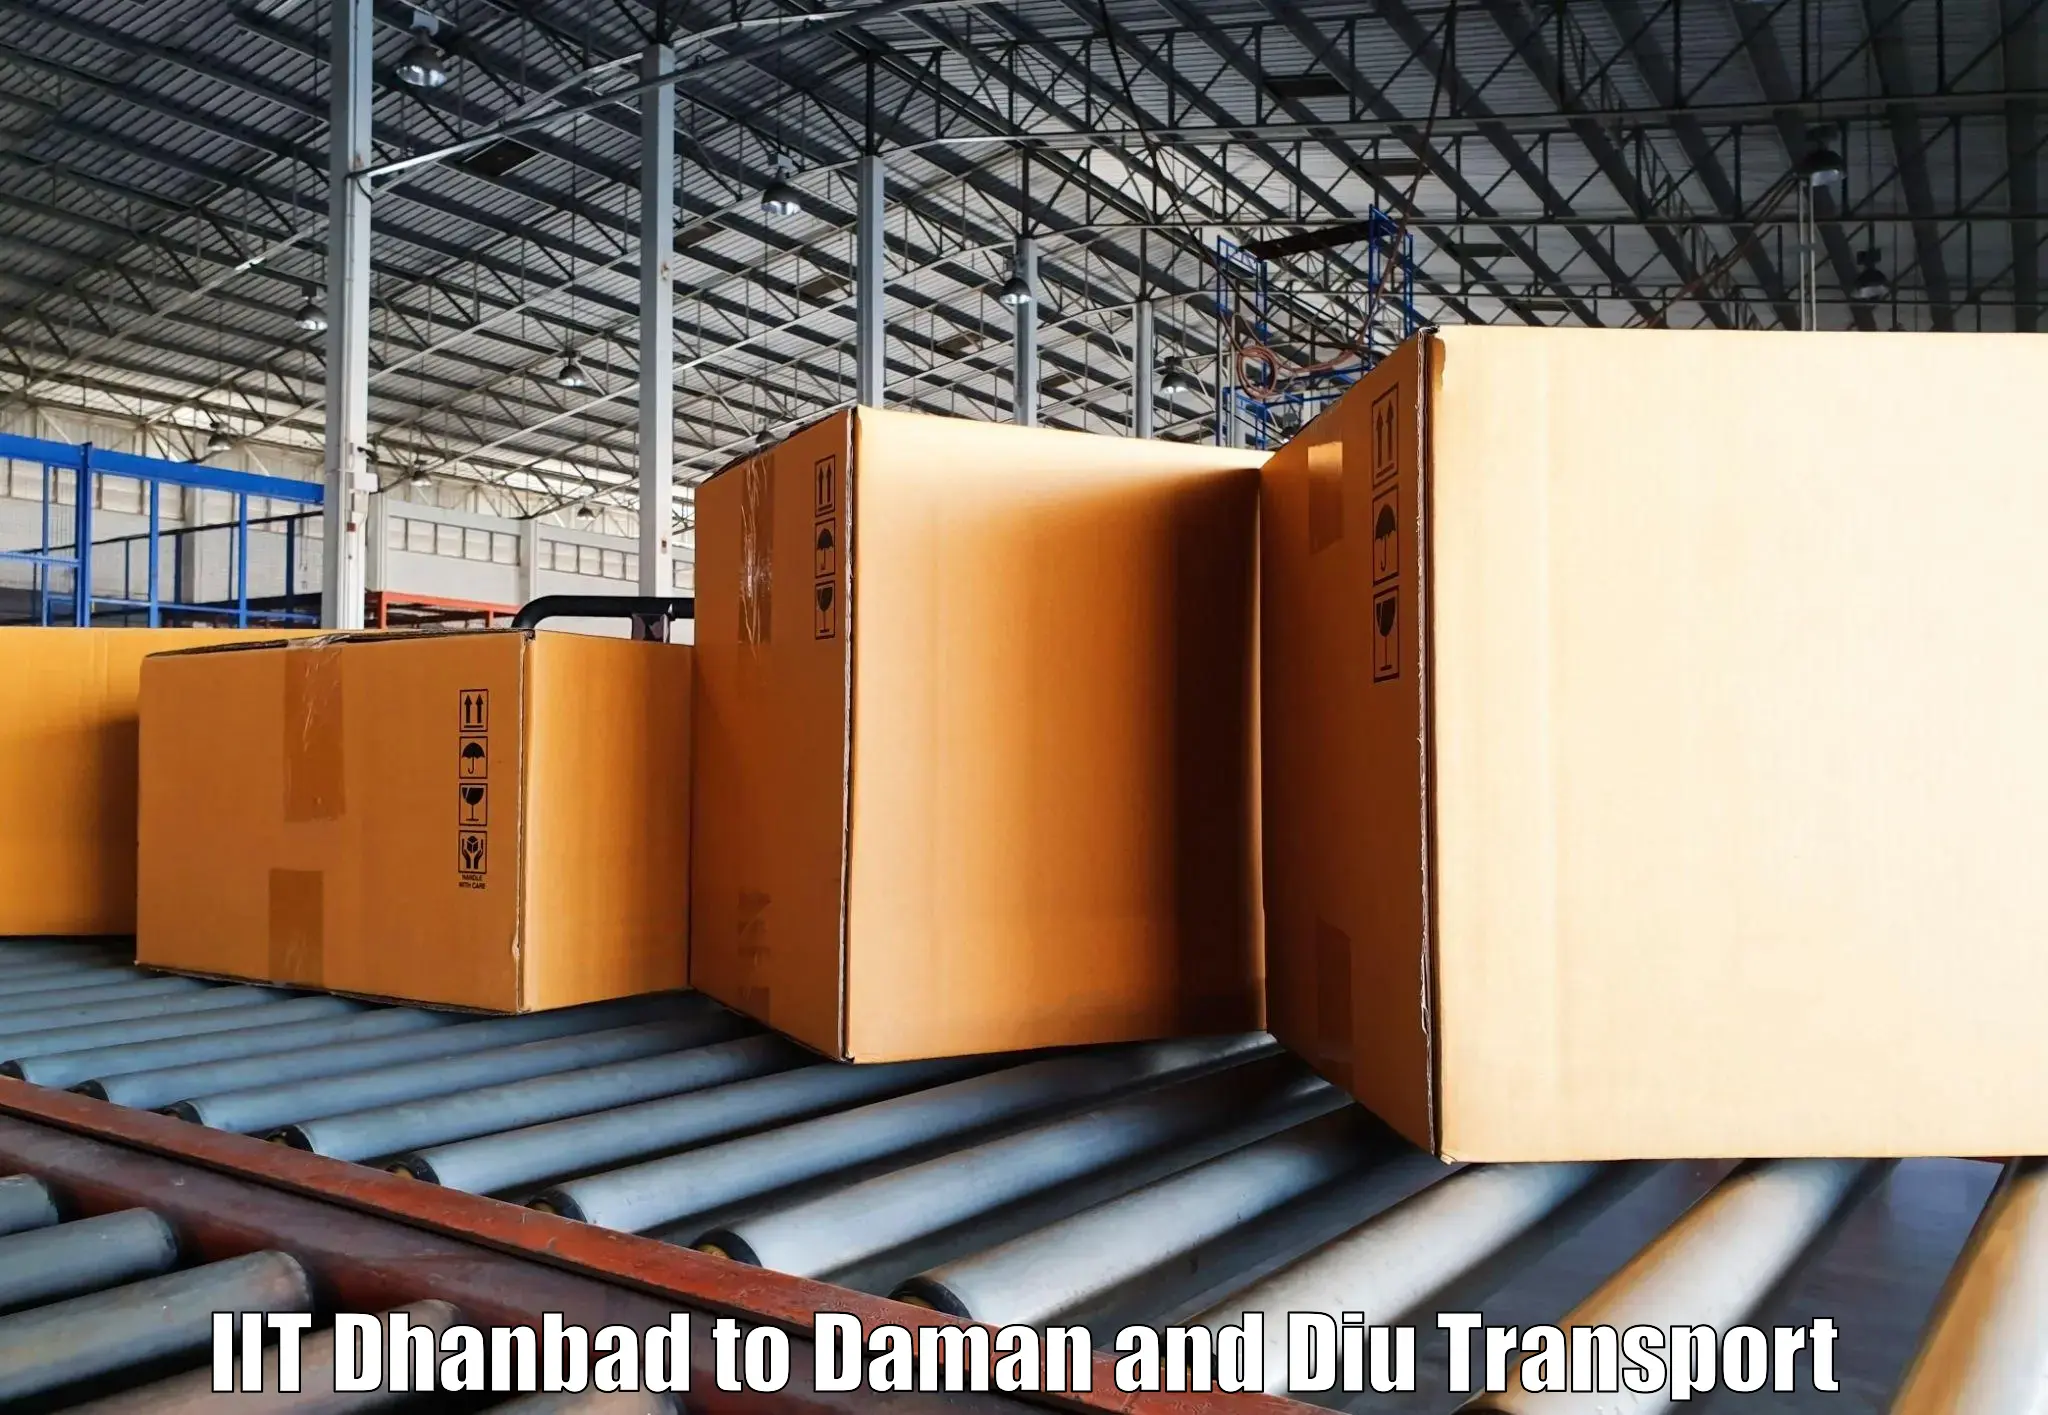 Two wheeler transport services IIT Dhanbad to Diu